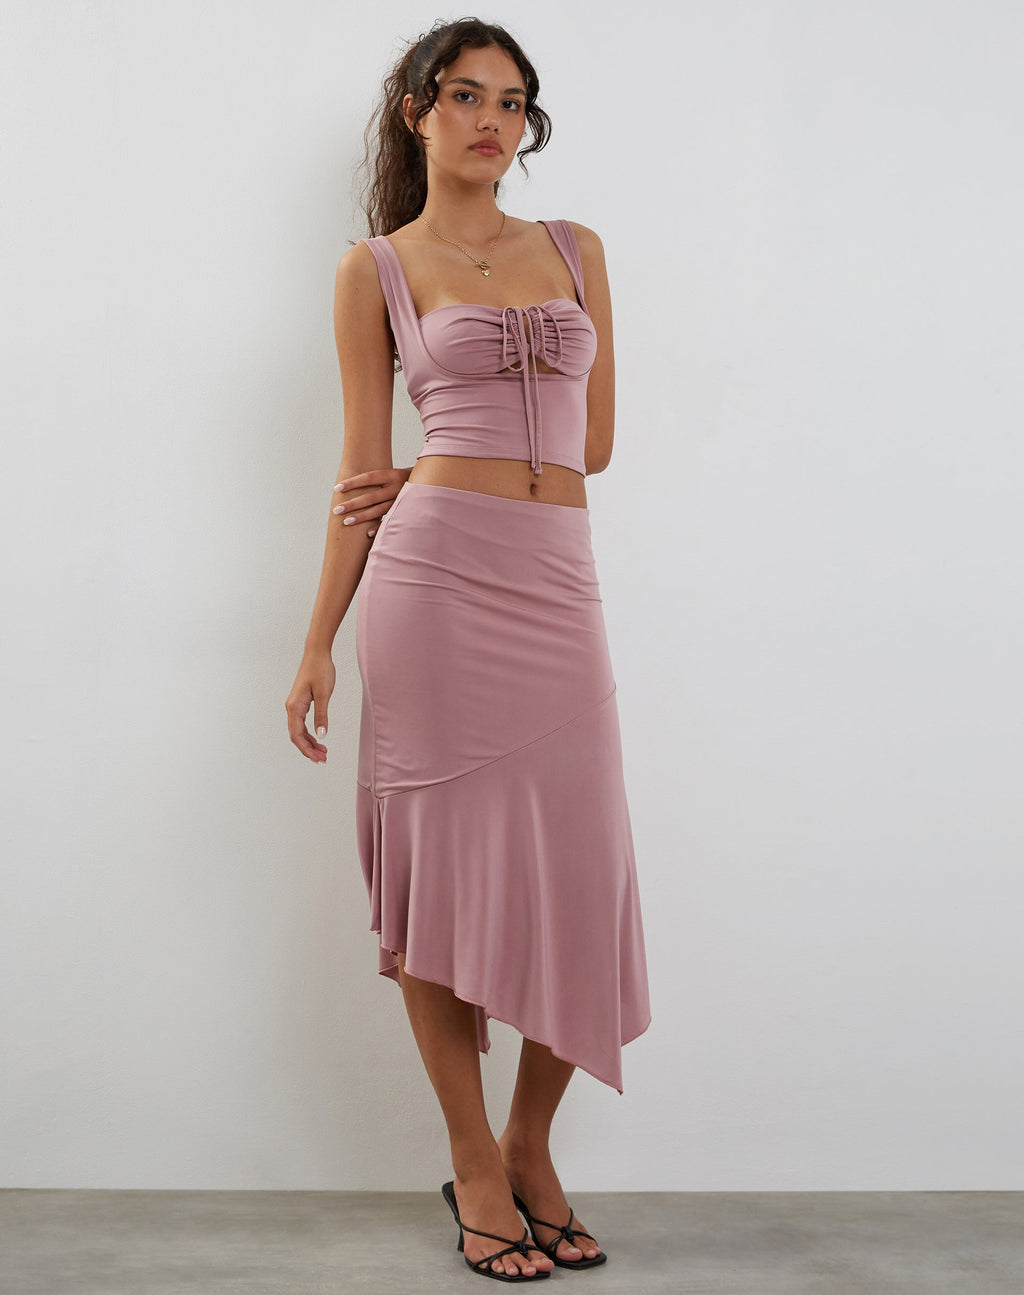 Cinta Low Rise Midi Skirt in Dusty Pink